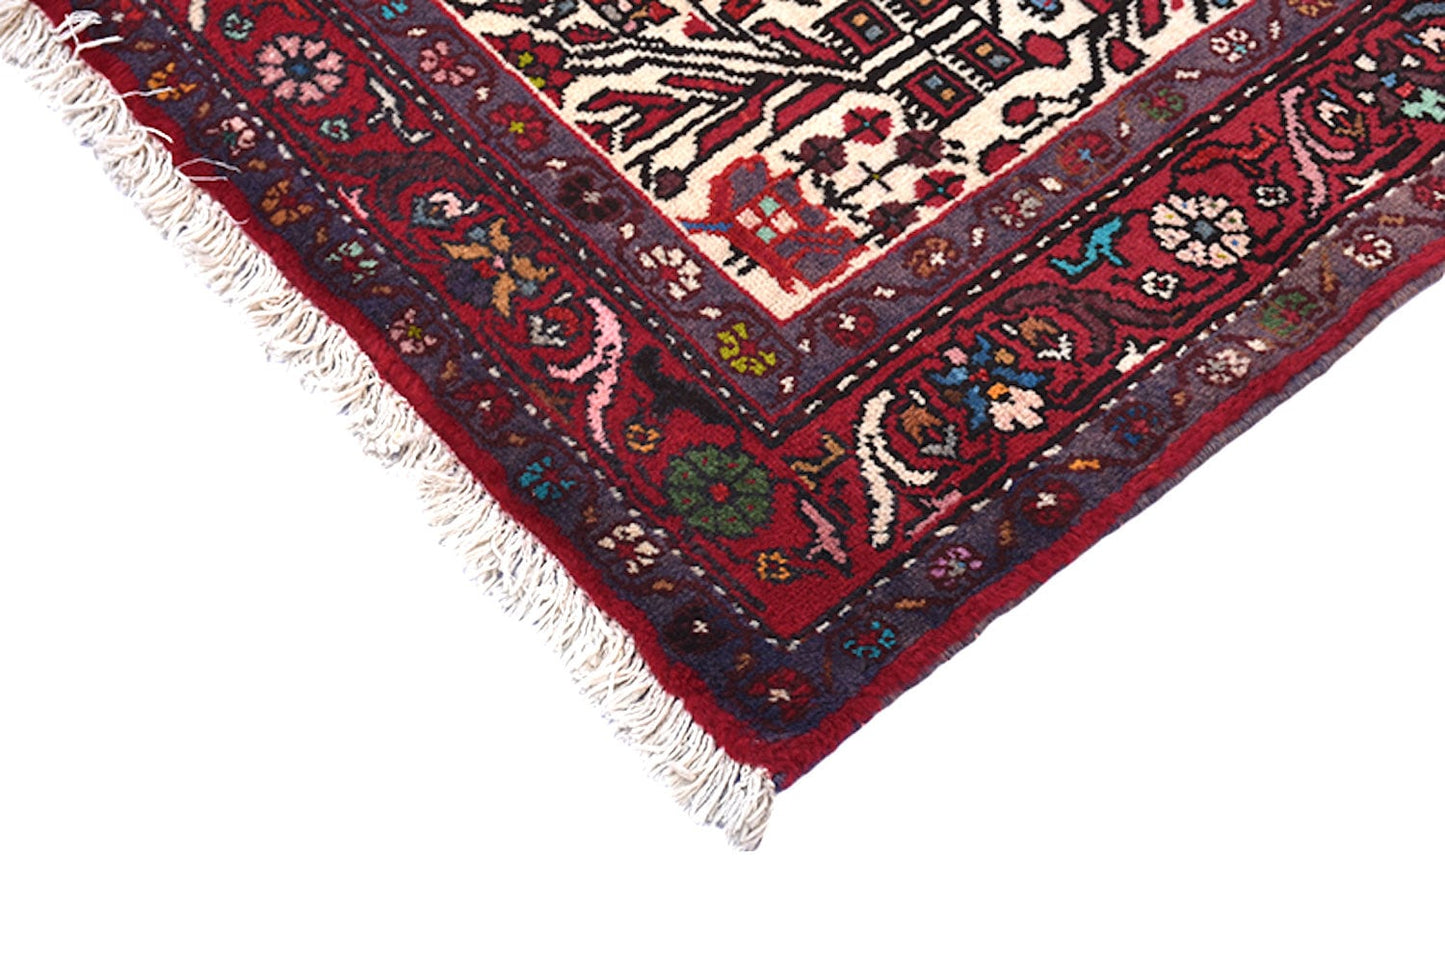 Birds & Plants  3 x 5 Colorful Rug | Red and Beige Rug | Vintage Persian Kazak | Hand Woven Antique Rug | Persian Style Landscape Rug